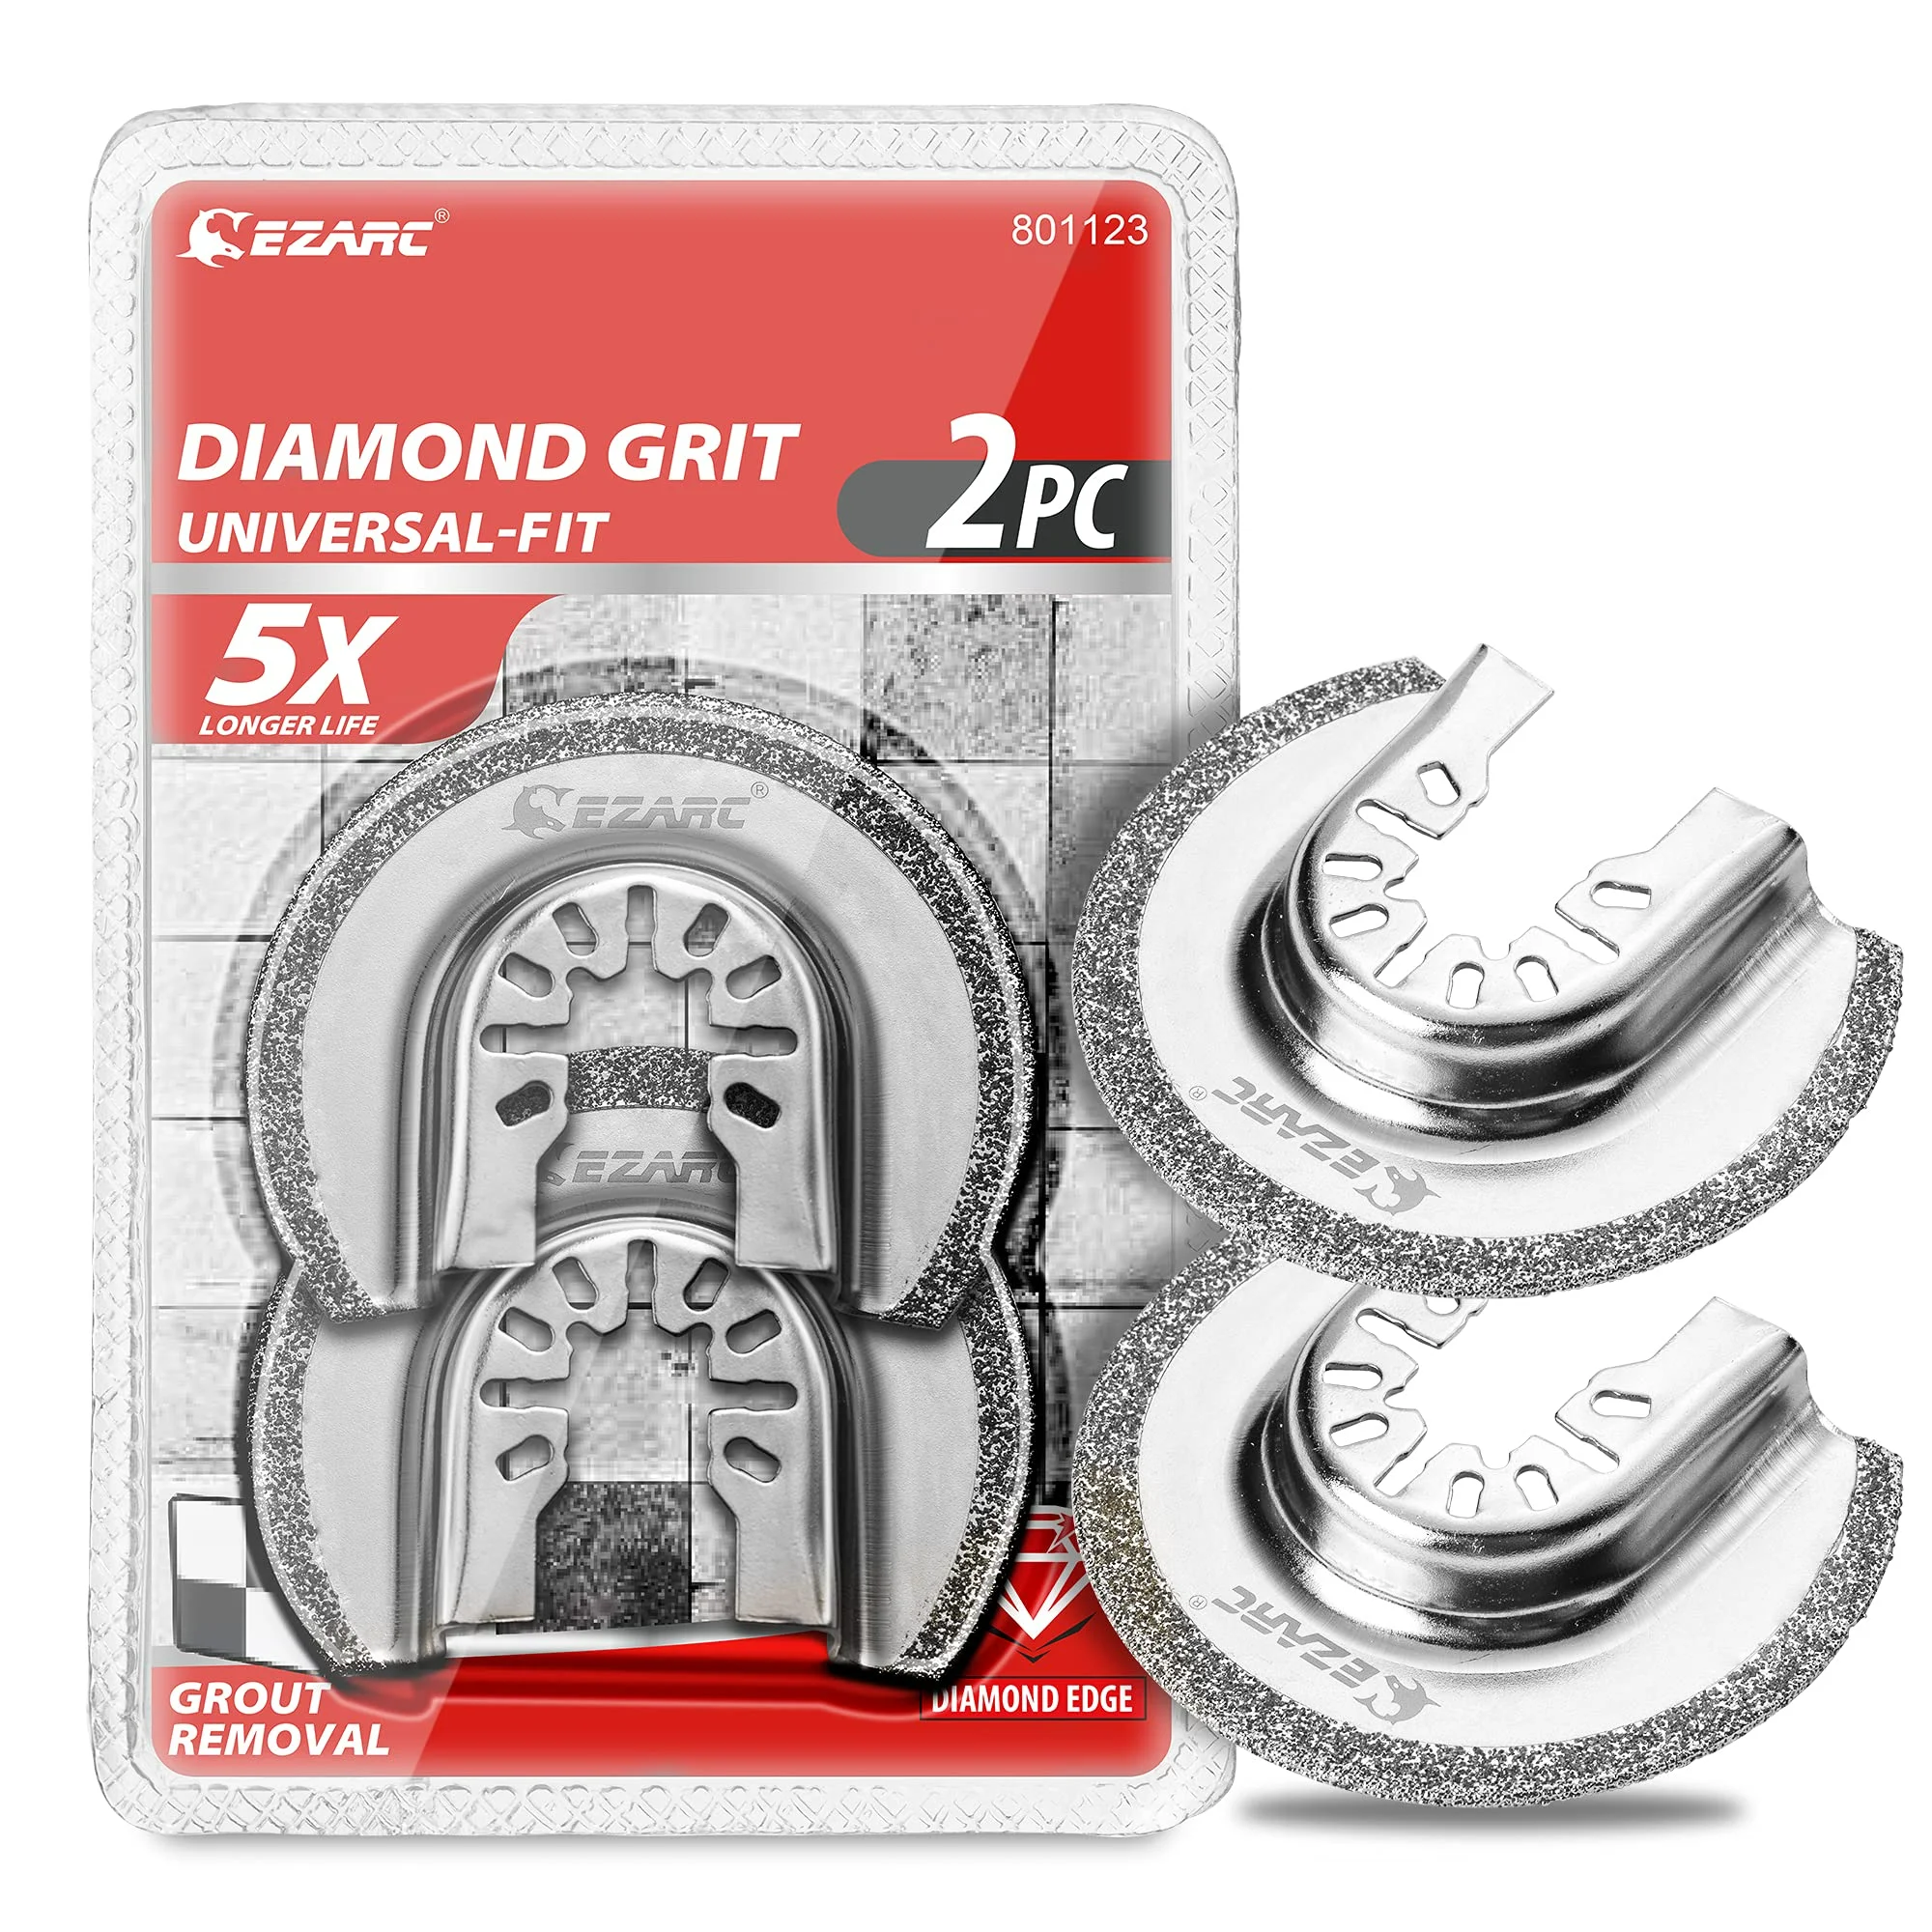 

Universal Fit For Grout Soft Tile Cutting Semi Circle Diamond Grit Oscillating Multitool Blade